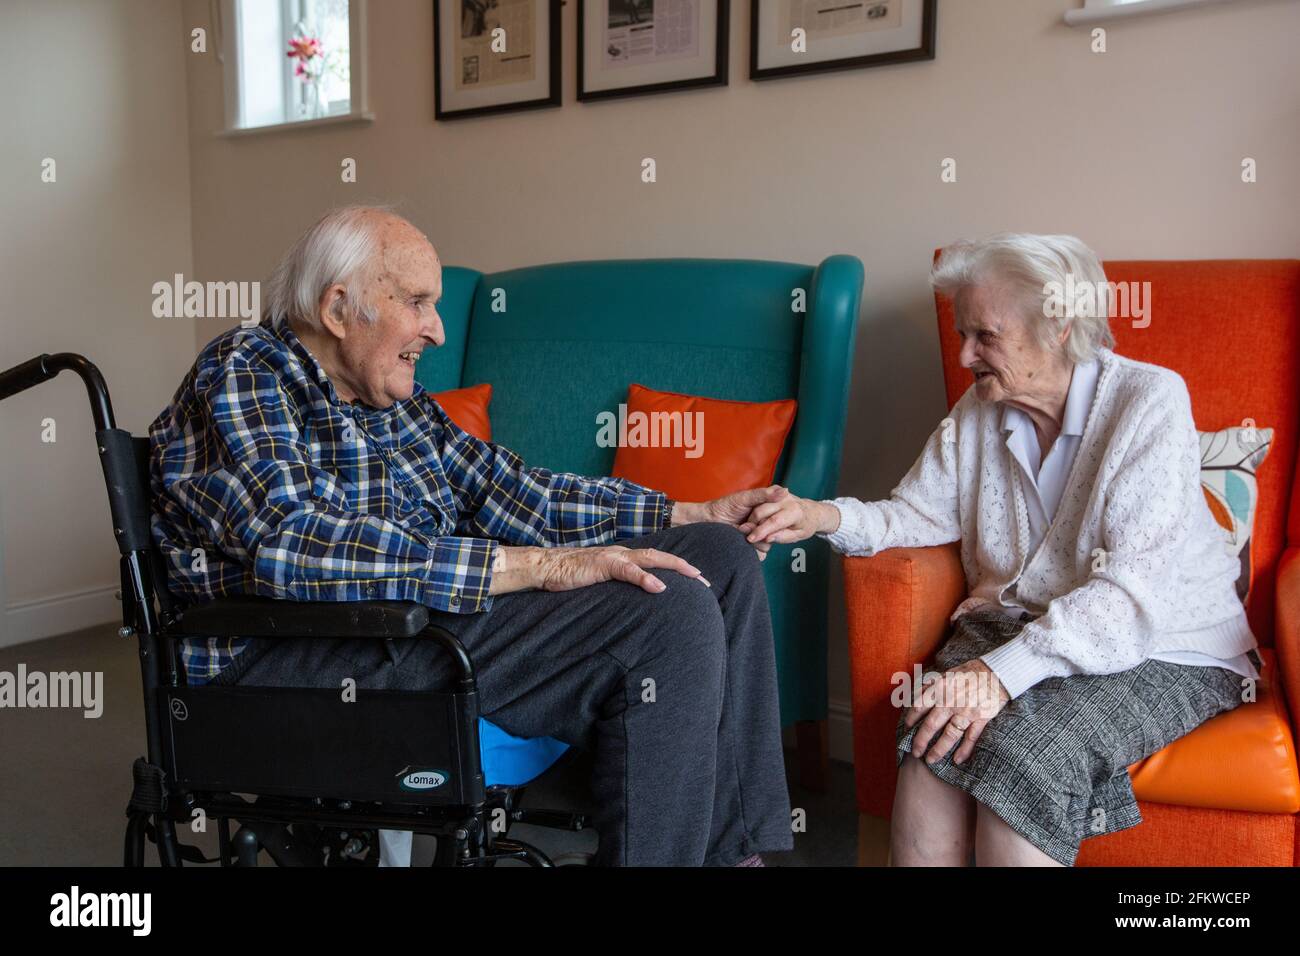 Elderly couple in their eighties reunited in a care come after being separated for several weeks due to the Coronavirus Pandemic, Hampshire, England. Stock Photo